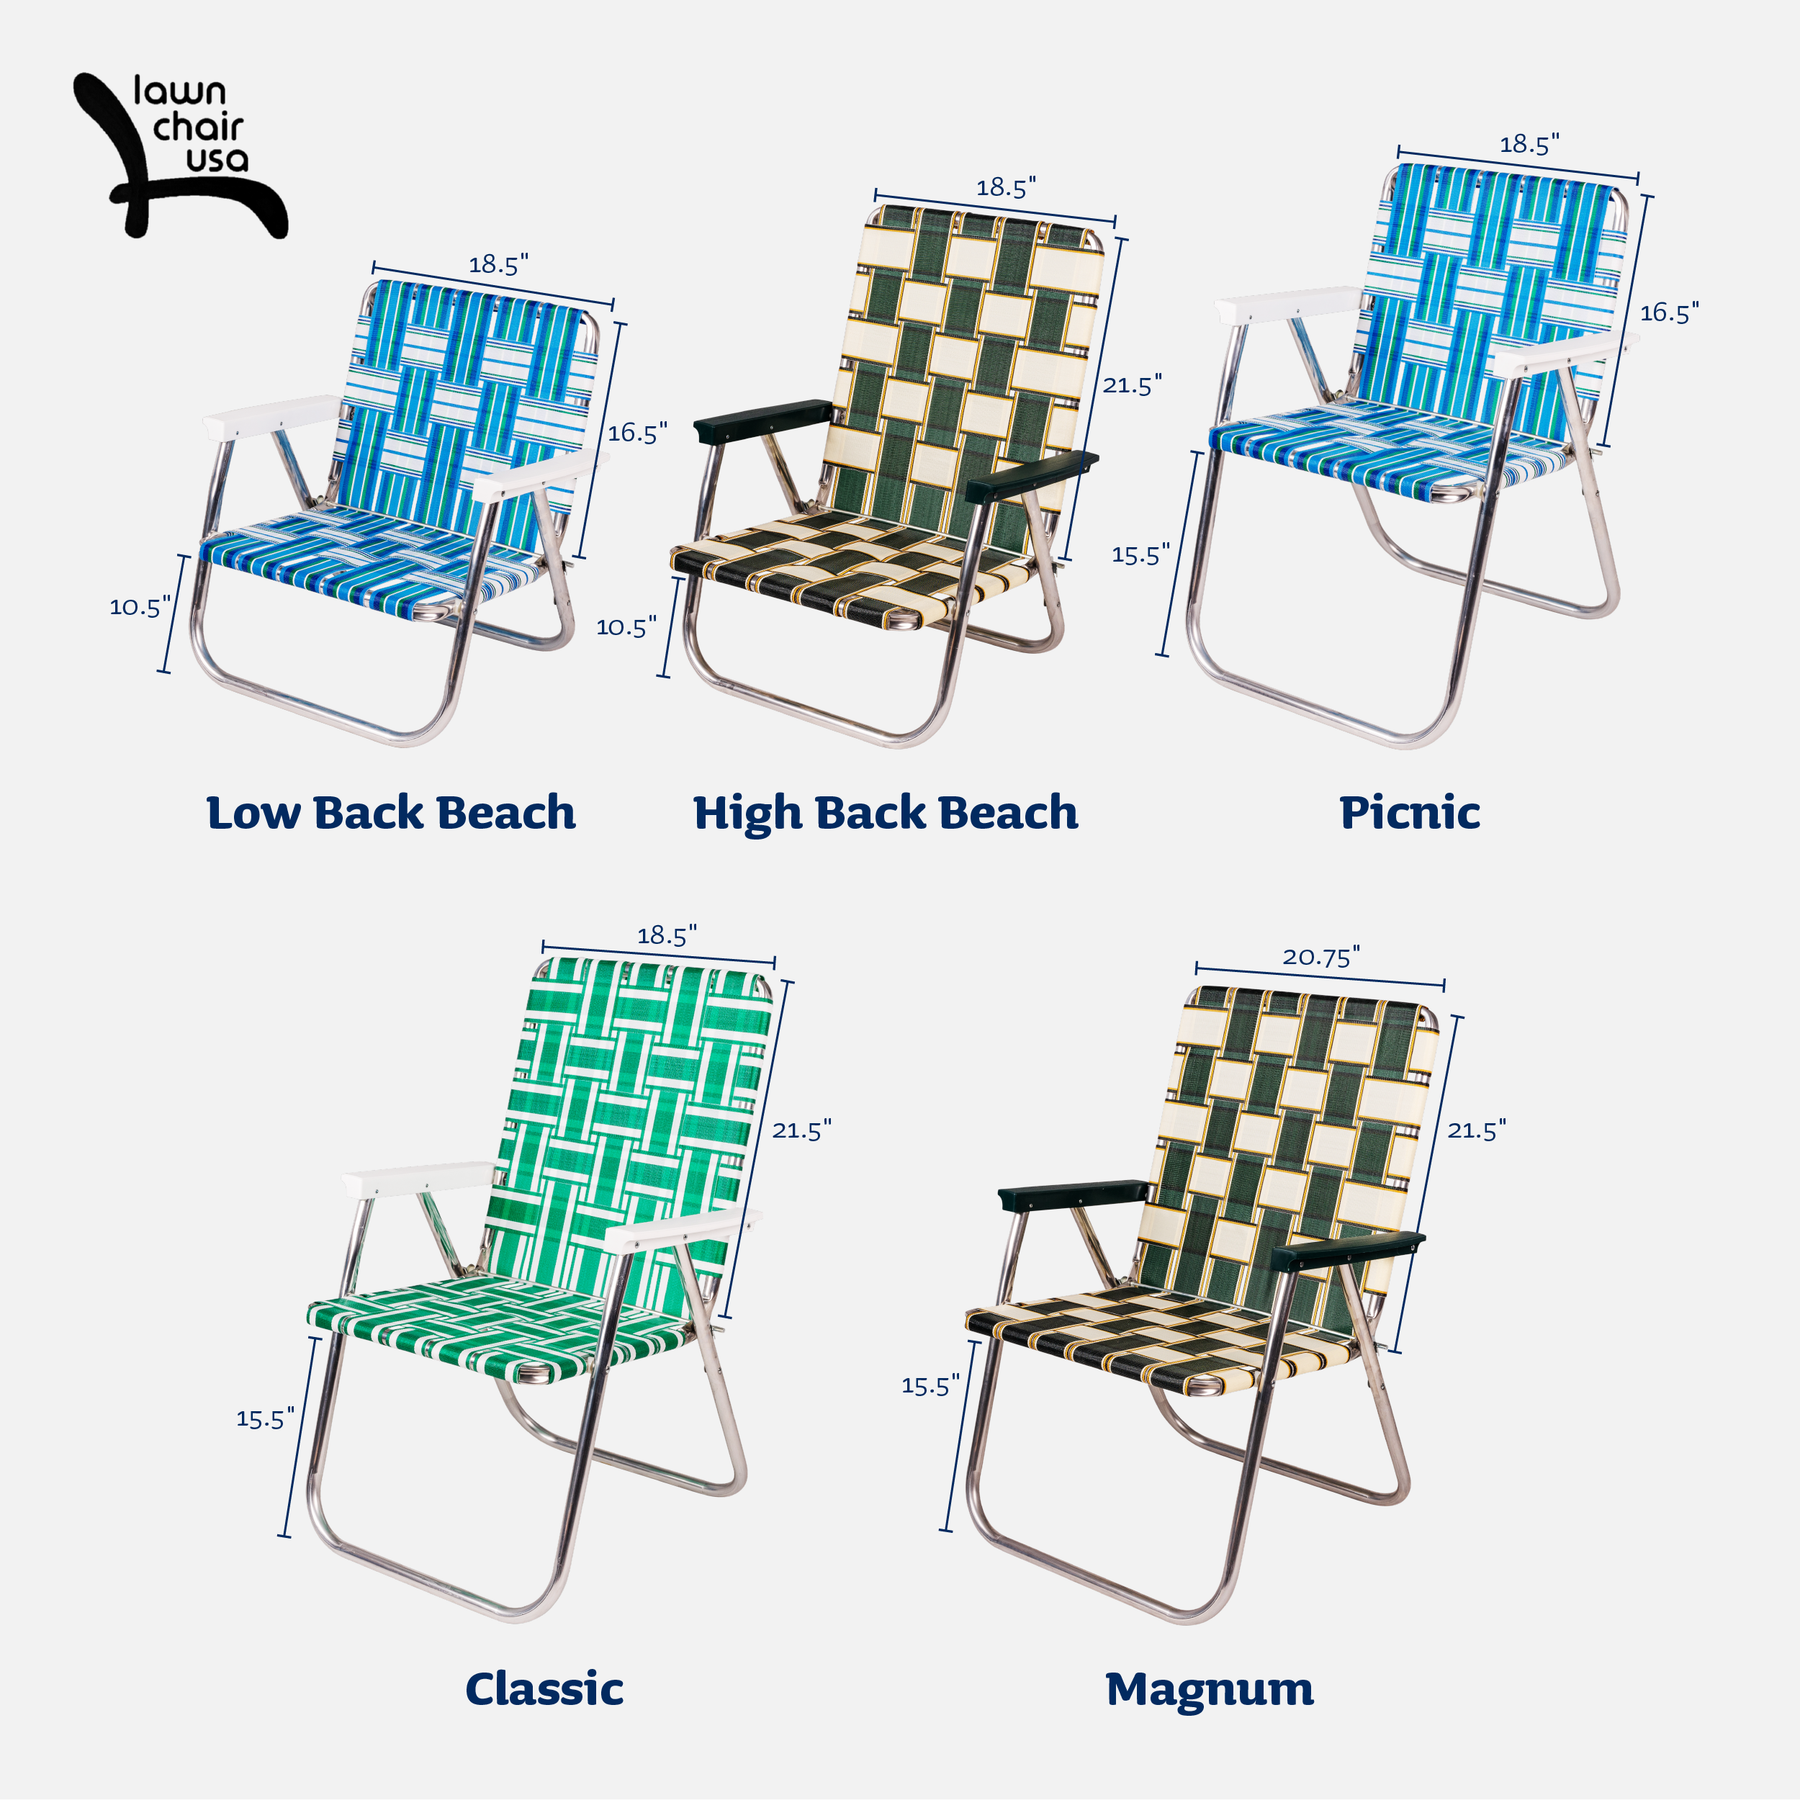 inexpensive aluminum webbed folding lawn chairs